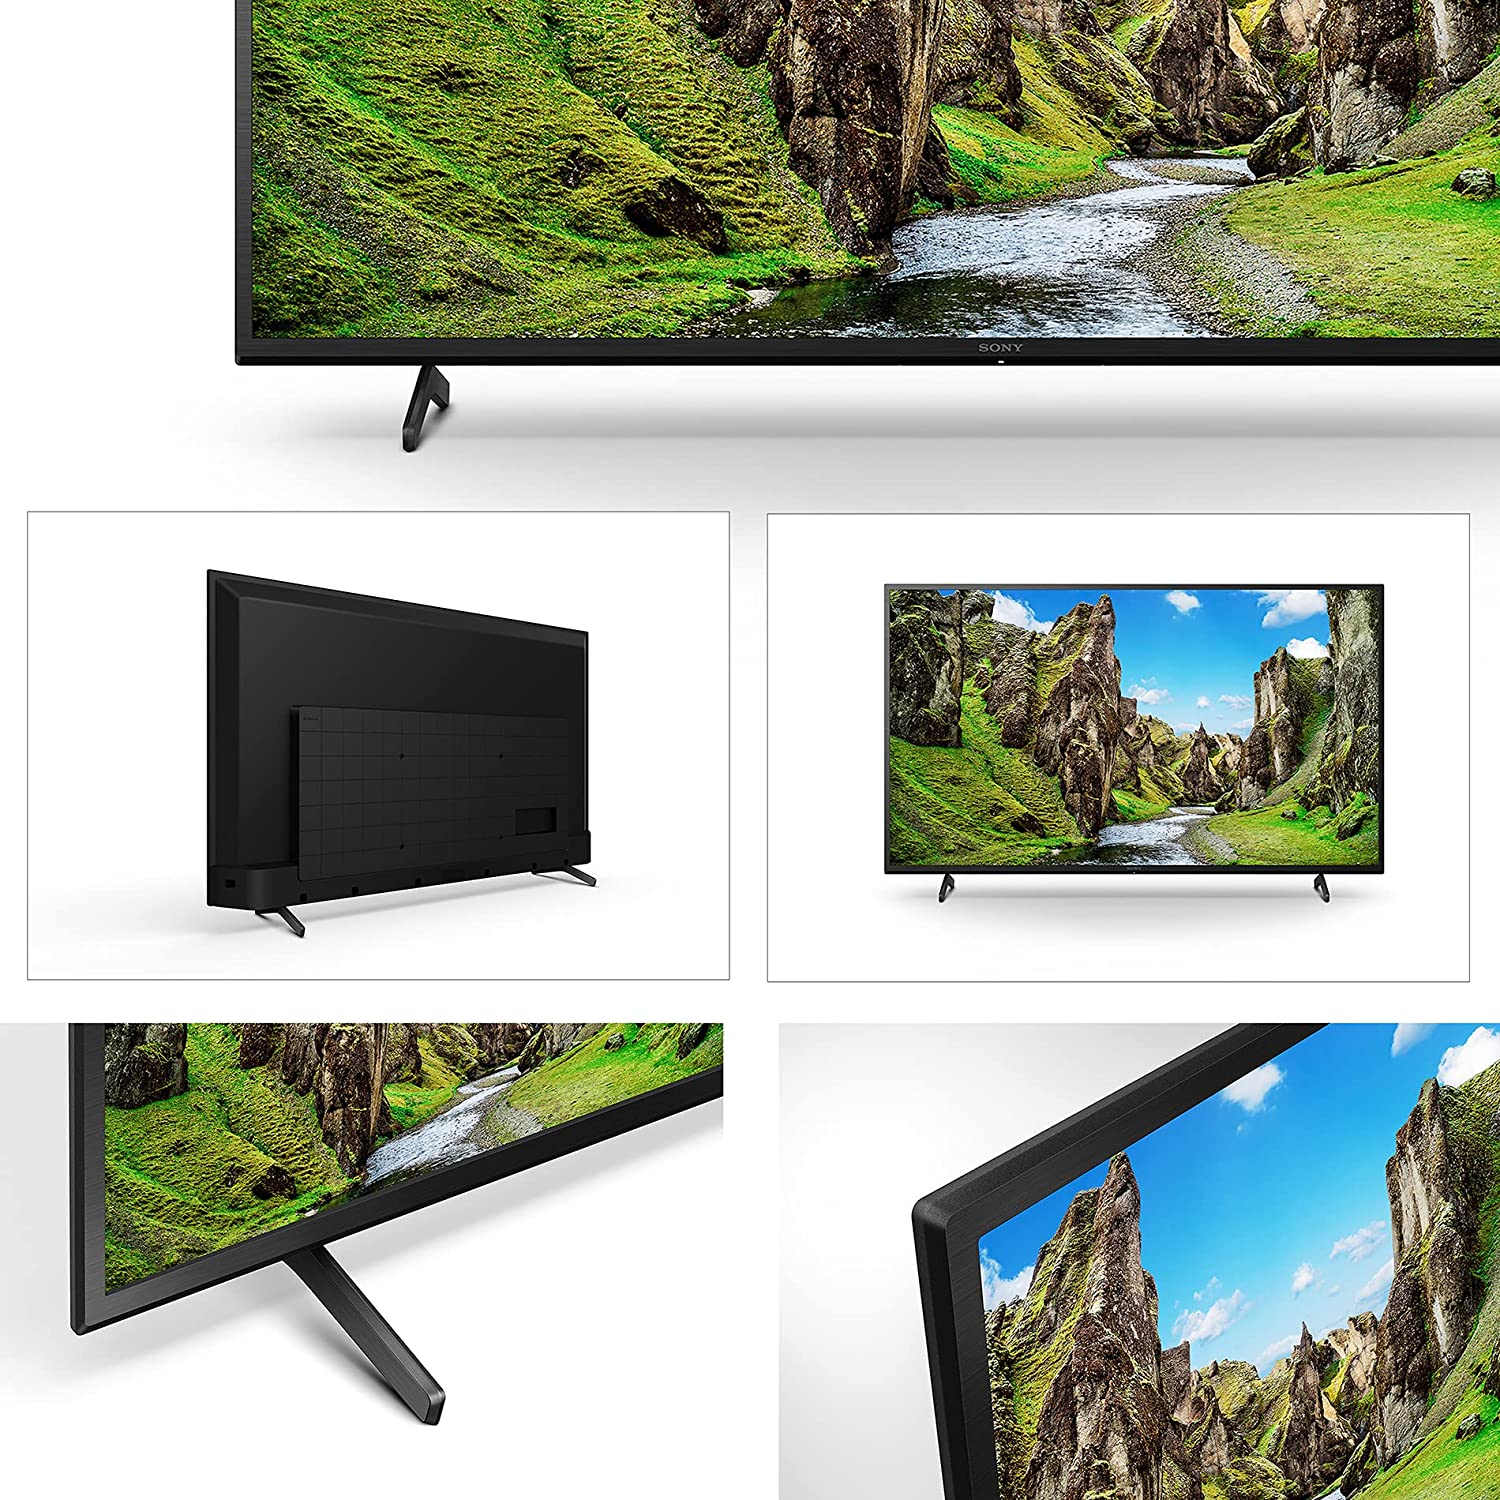 Buy Sony Bravia 43 inch 4K Ultra HD Smart Android TV